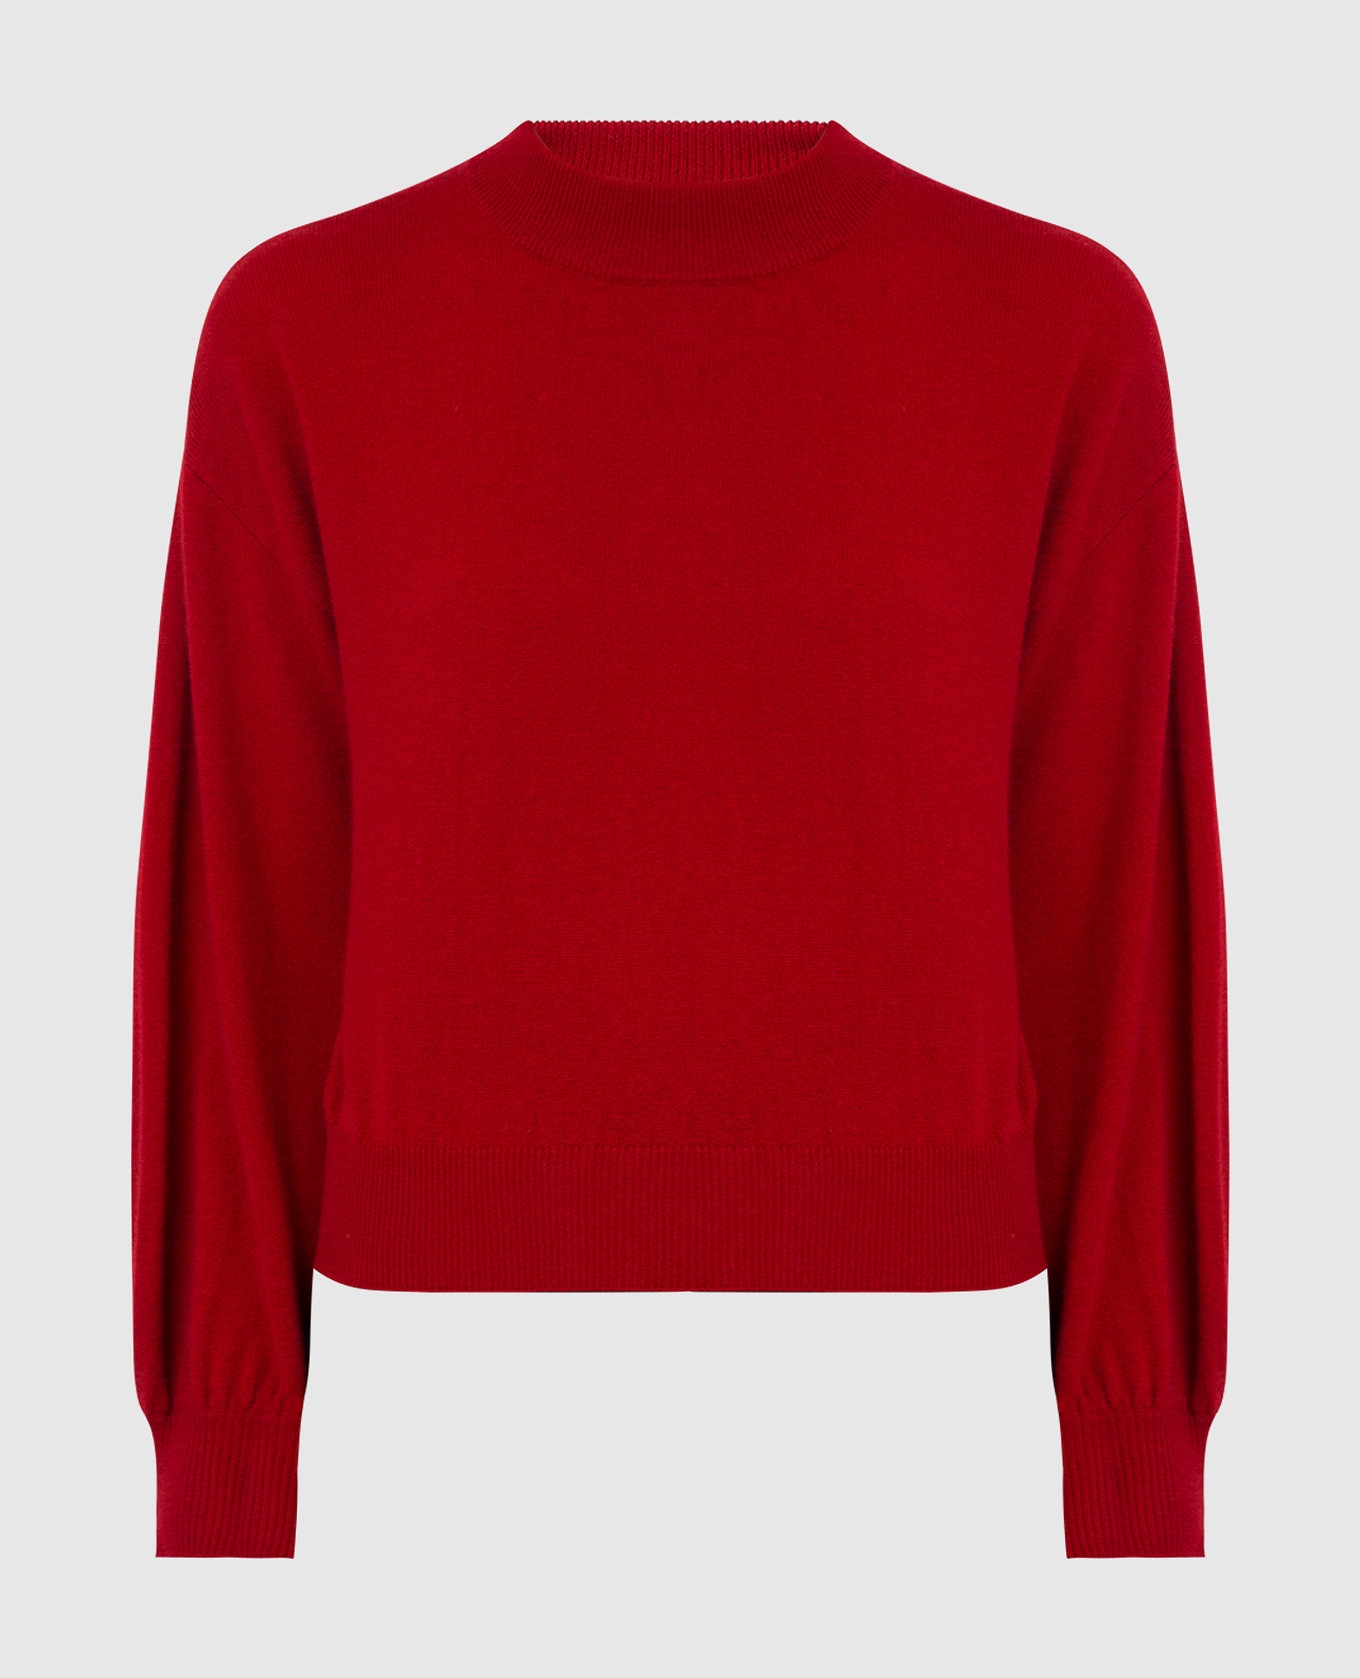 Red wool and cashmere jumper